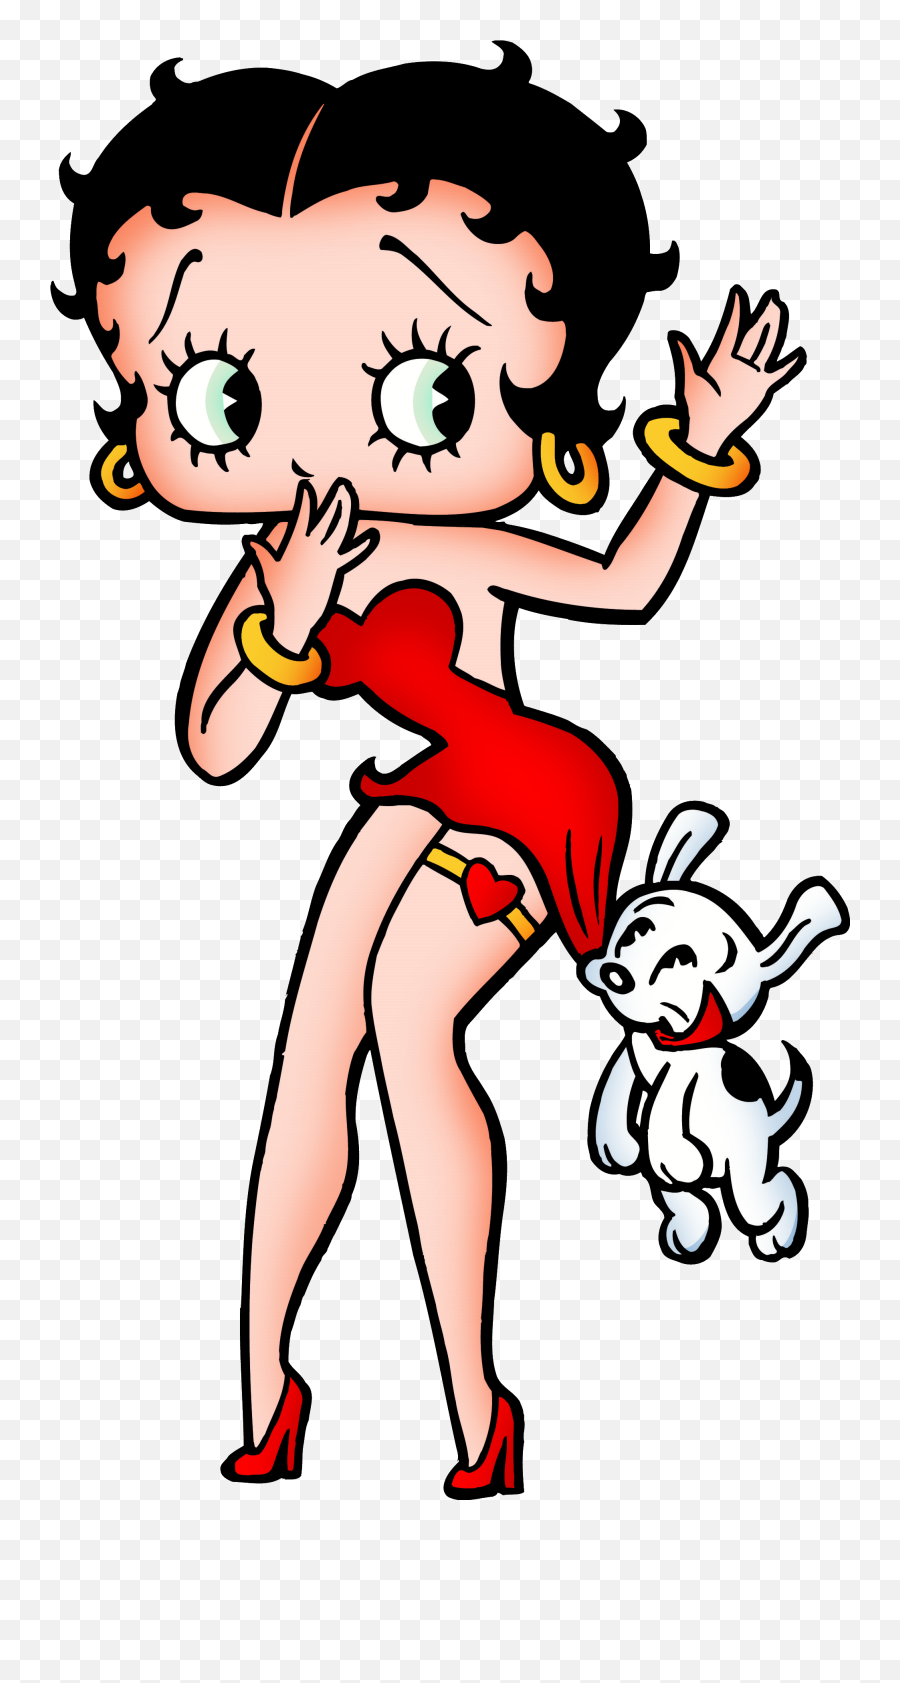 Betty Boop Png Image - Betty Boop Boop,Betty Boop Png